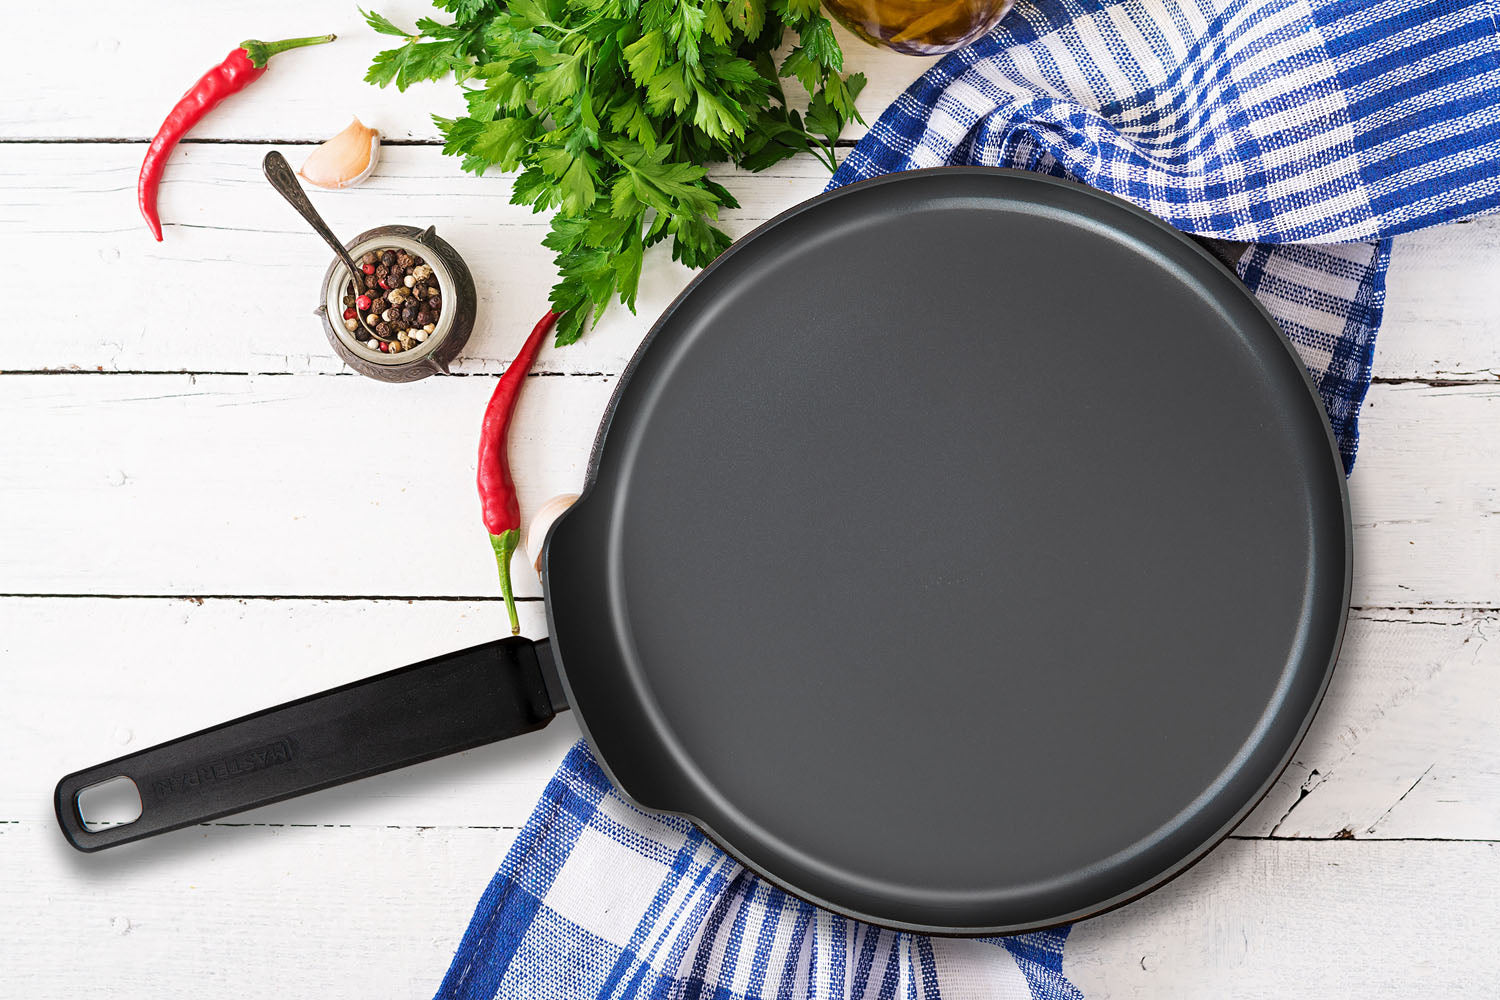 MasterPan MP-182 11 in. Griddle & Pancake Pan - Healthy Ceramic Non-Stick Aluminium Cookware with Stainless Steel Chefs Handle